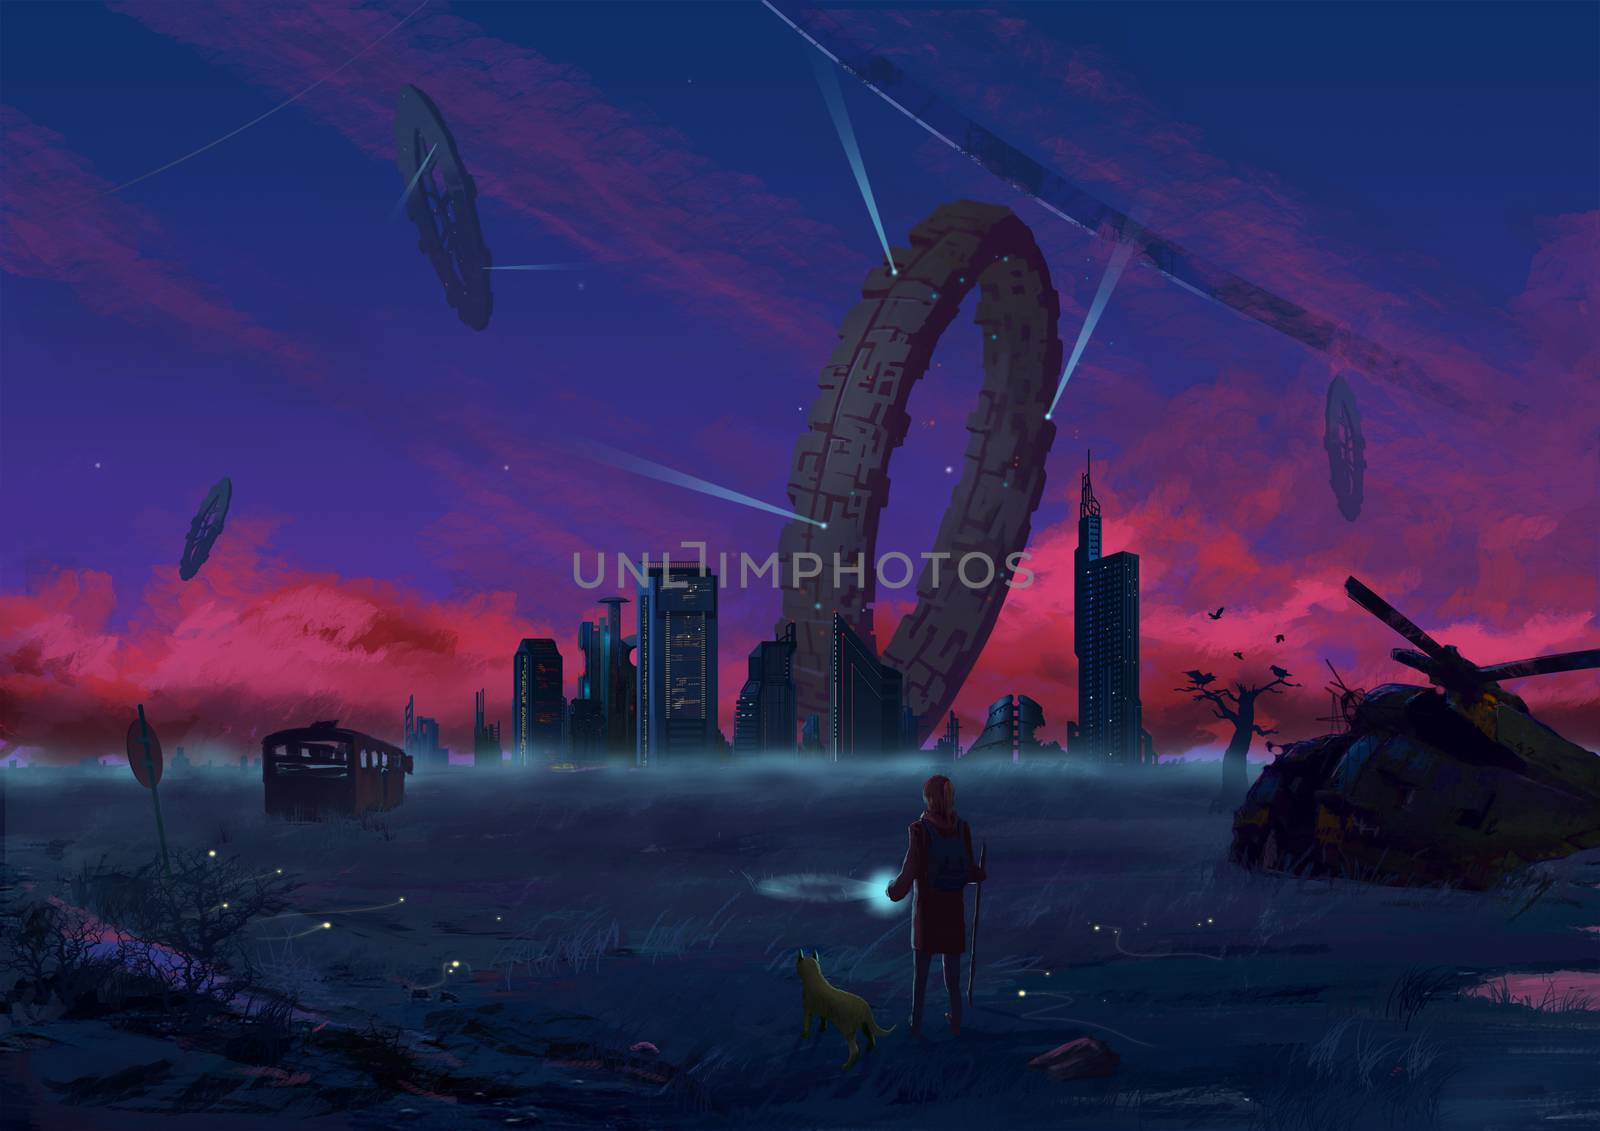 Illustration: Can you believe your city was occupied by Alien Circles after you went for a walk? What will you feel about that? Realistic Cartoon Style. Sci-Fi Scene / Wallpaper / Background Design. by NextMars